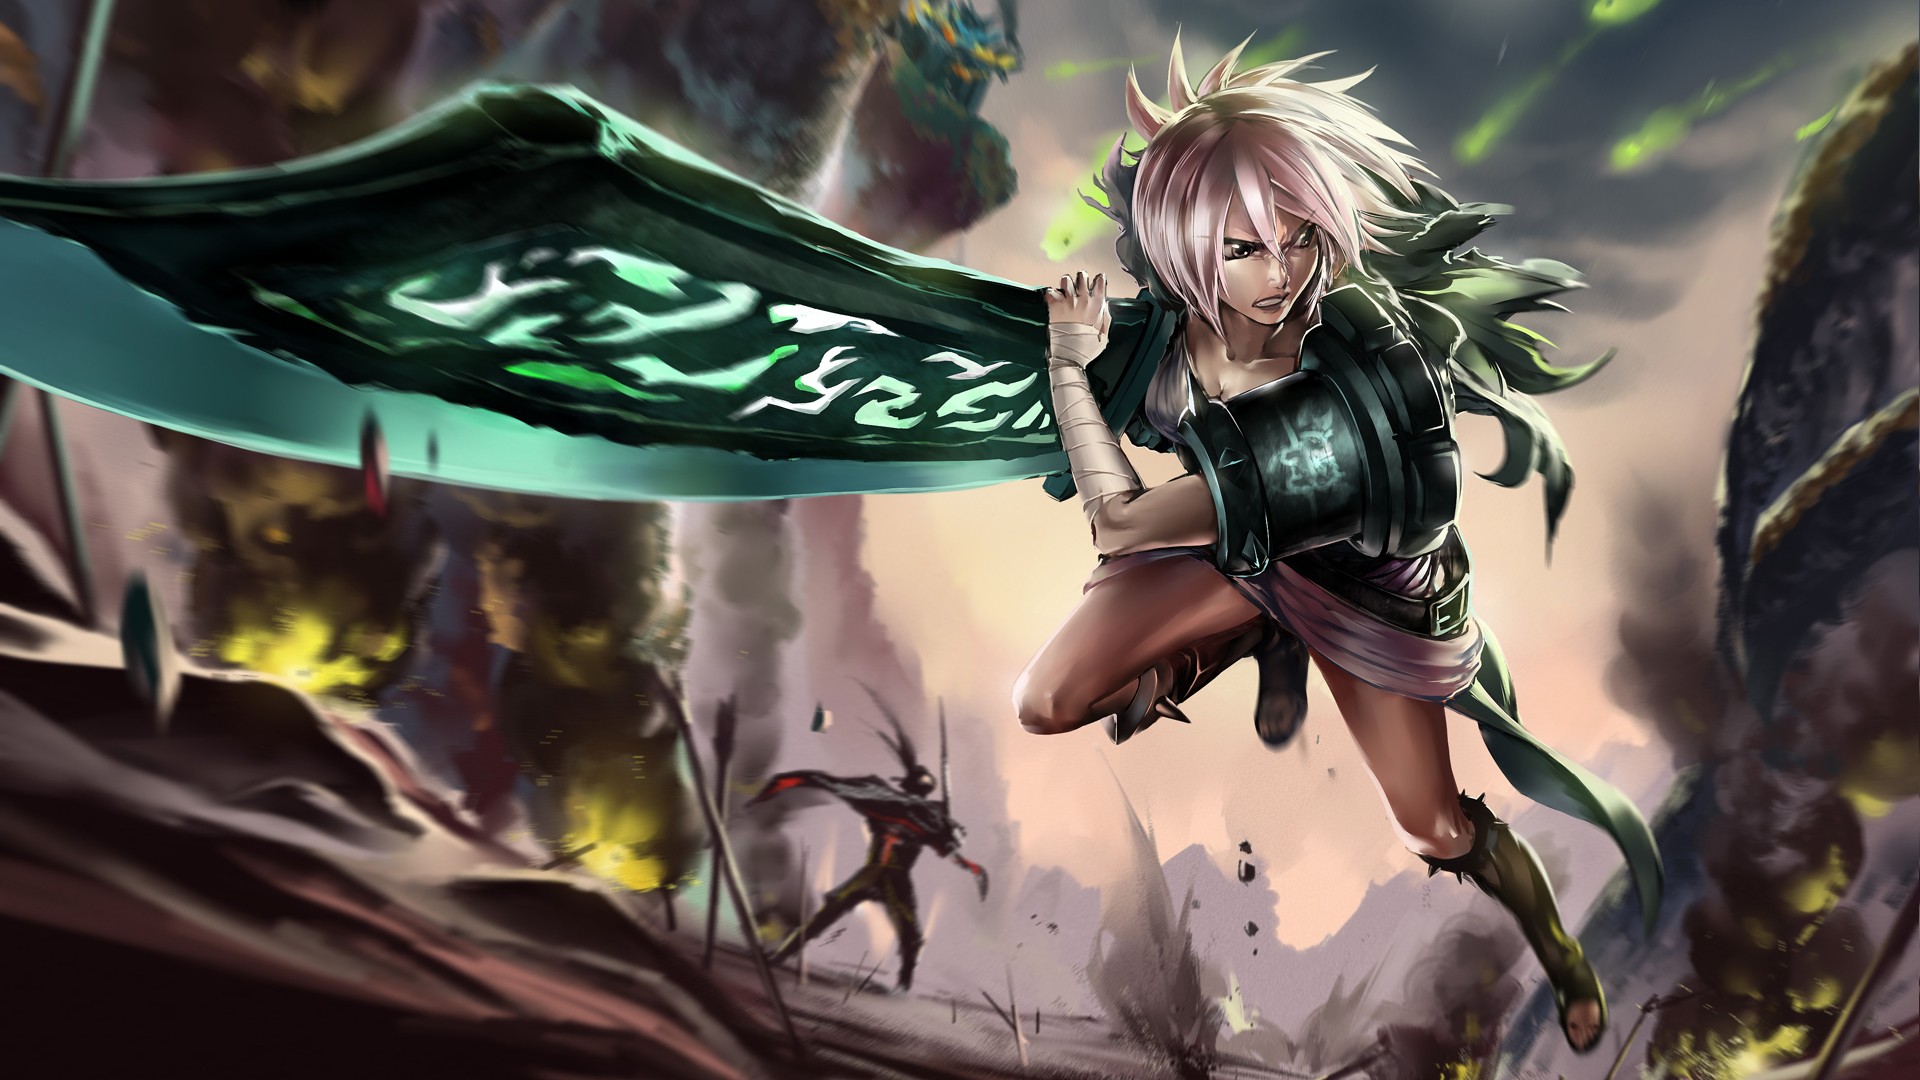 Anime 1920x1080 League of Legends video games Riven (League of Legends) video game art video game girls fantasy art fantasy girl sword weapon women with swords PC gaming